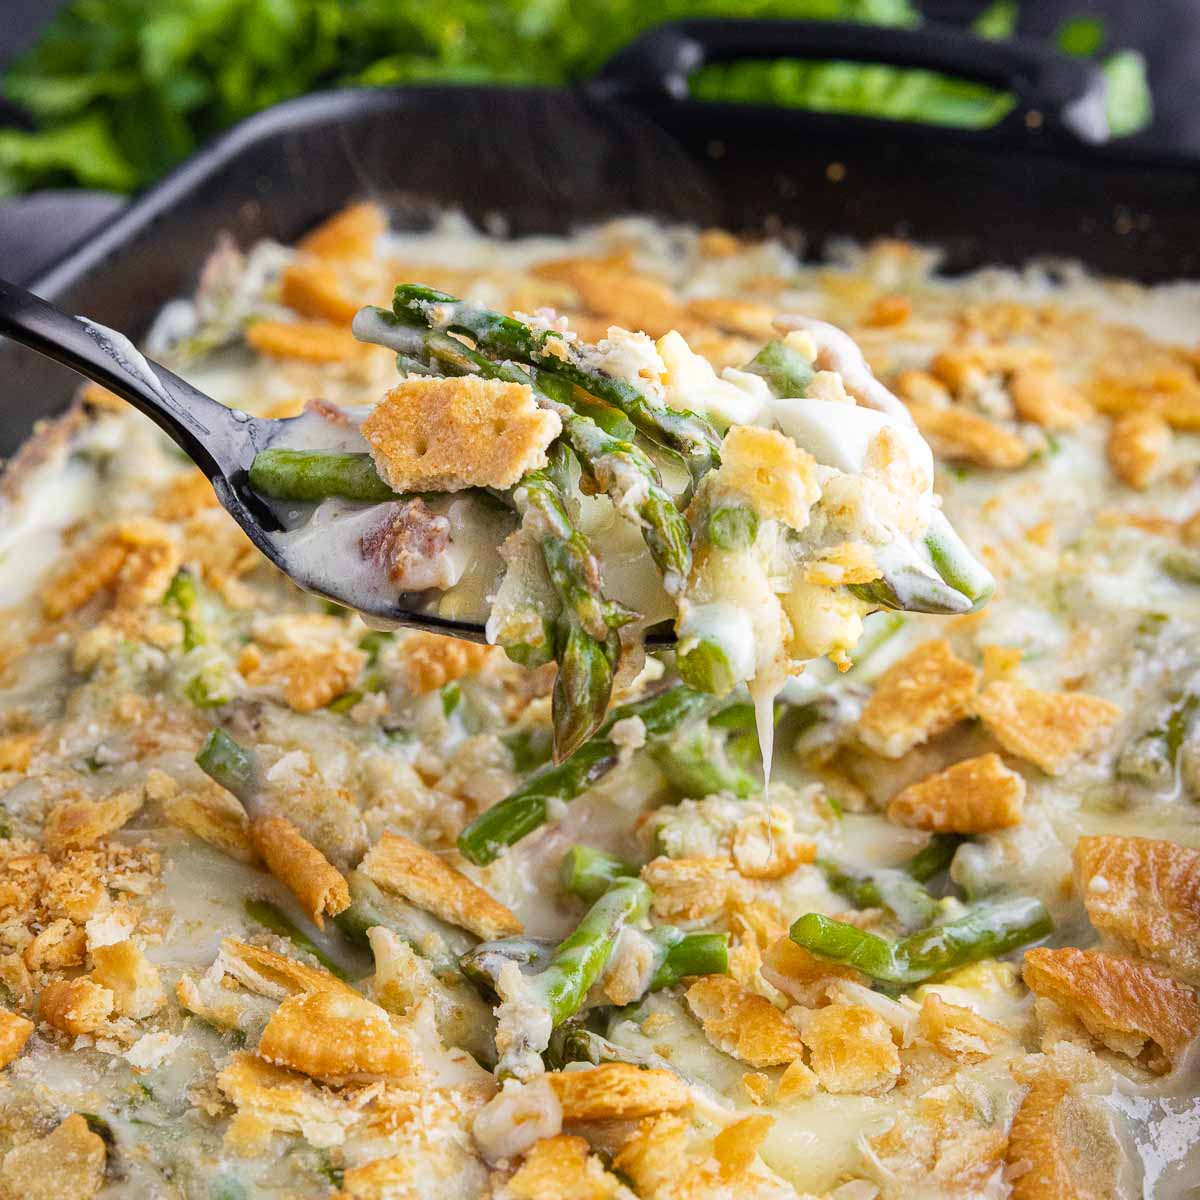 A spoonful of asparagus casserole casserole in a skillet.